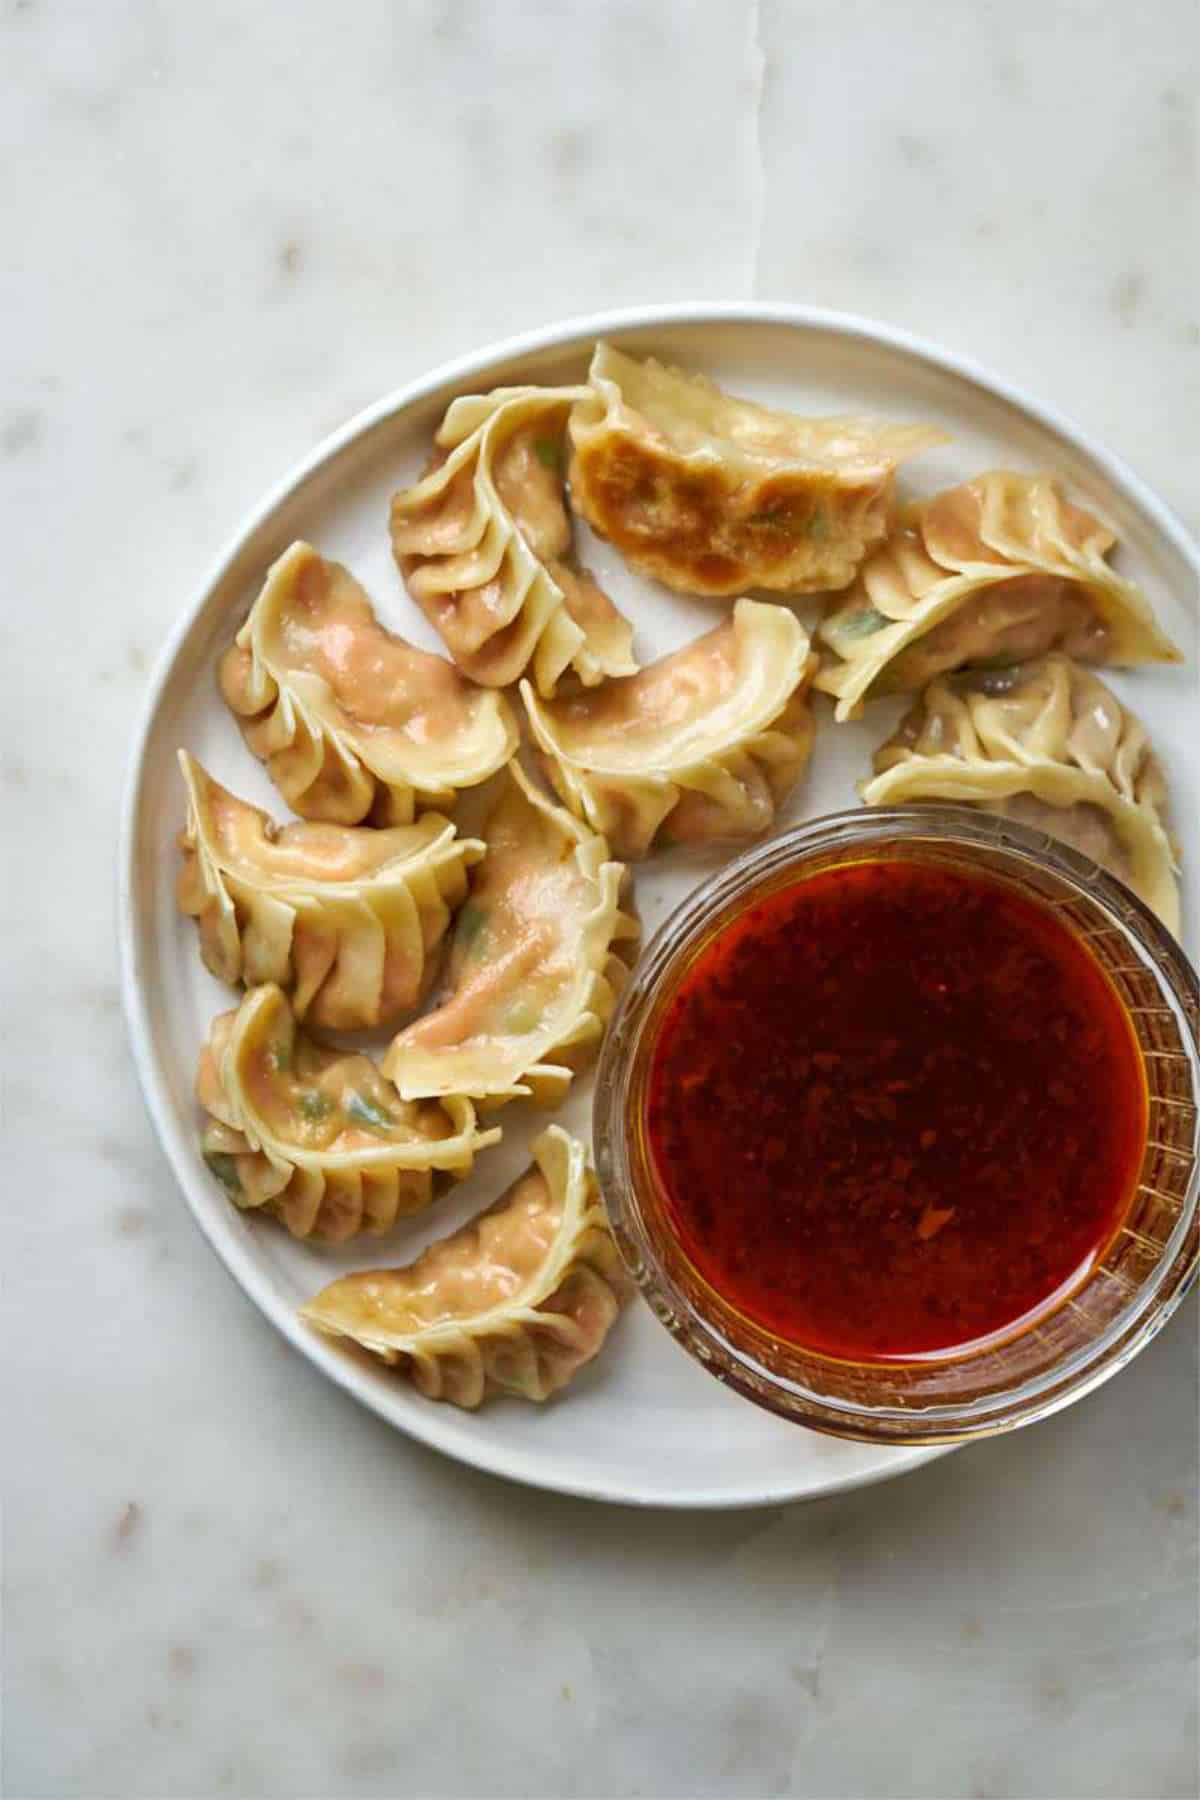 Cooked potstickers on a plate with dipping sauce.